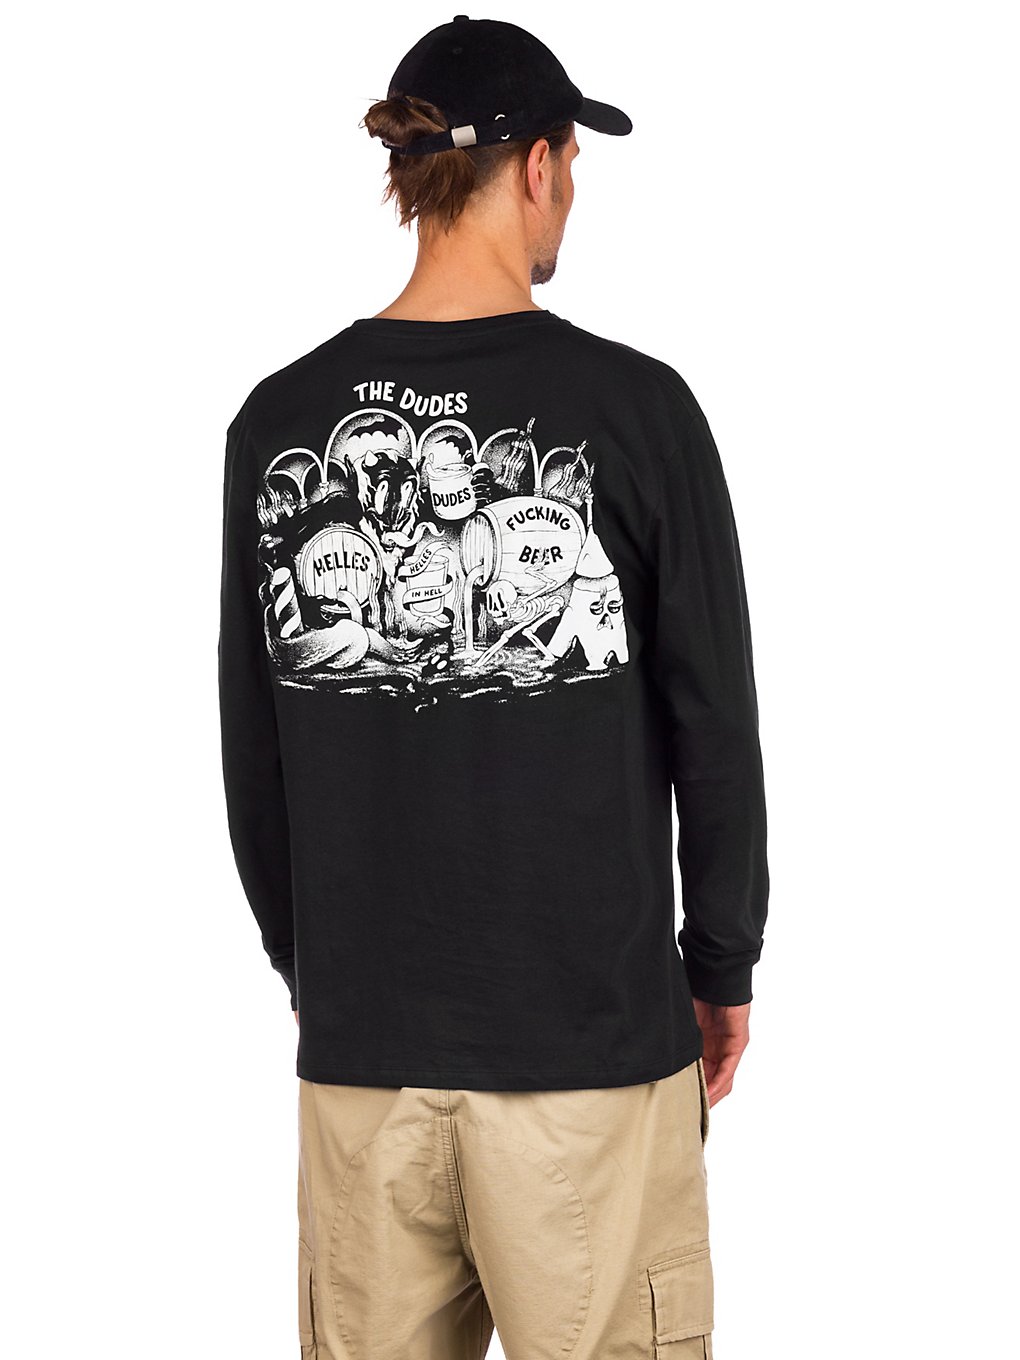 The Dudes Helles In Hell Long Sleeve T-Shirt caviar